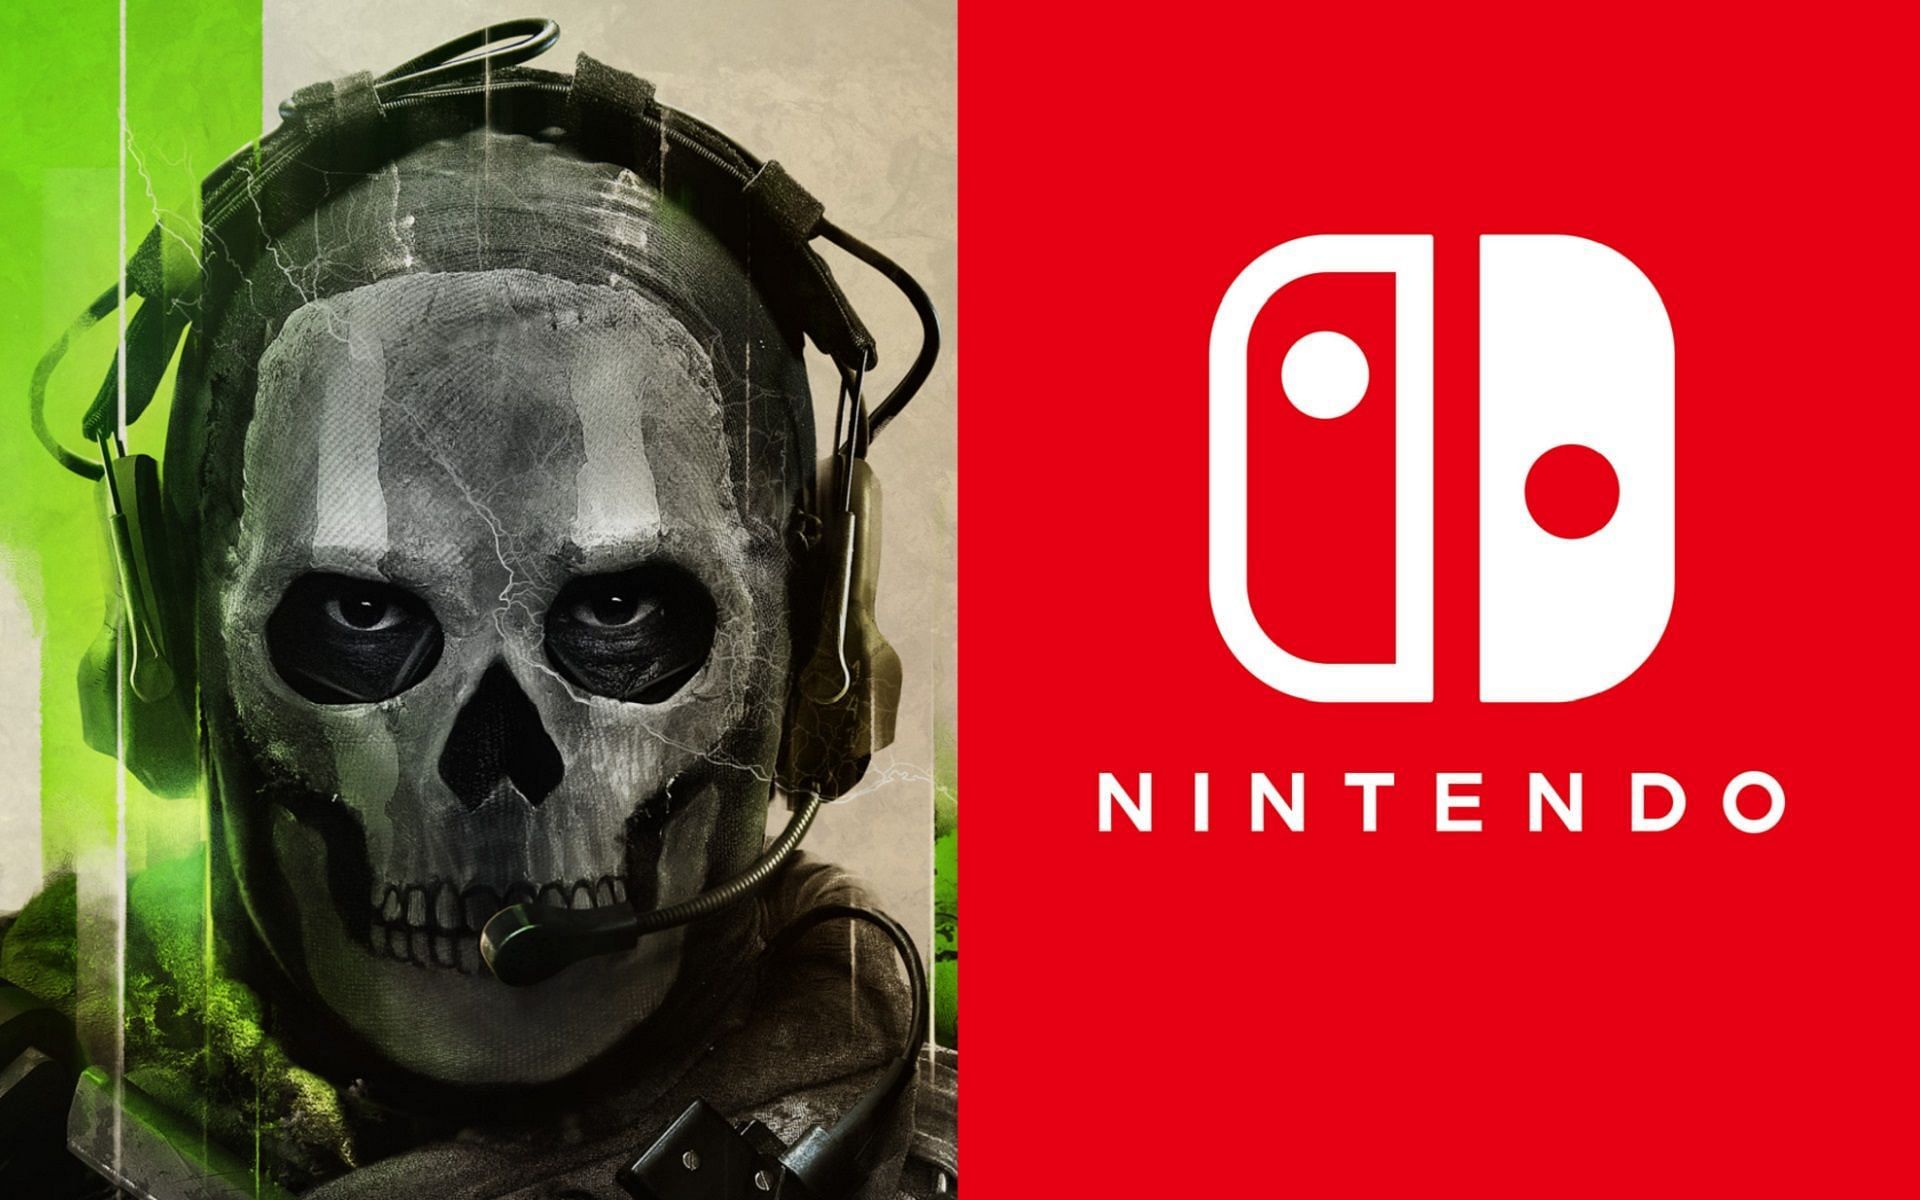 Activison reportedly setting up new studio for the development of Call of Duty games on Nintendo (Images via Activision and Nintendo)